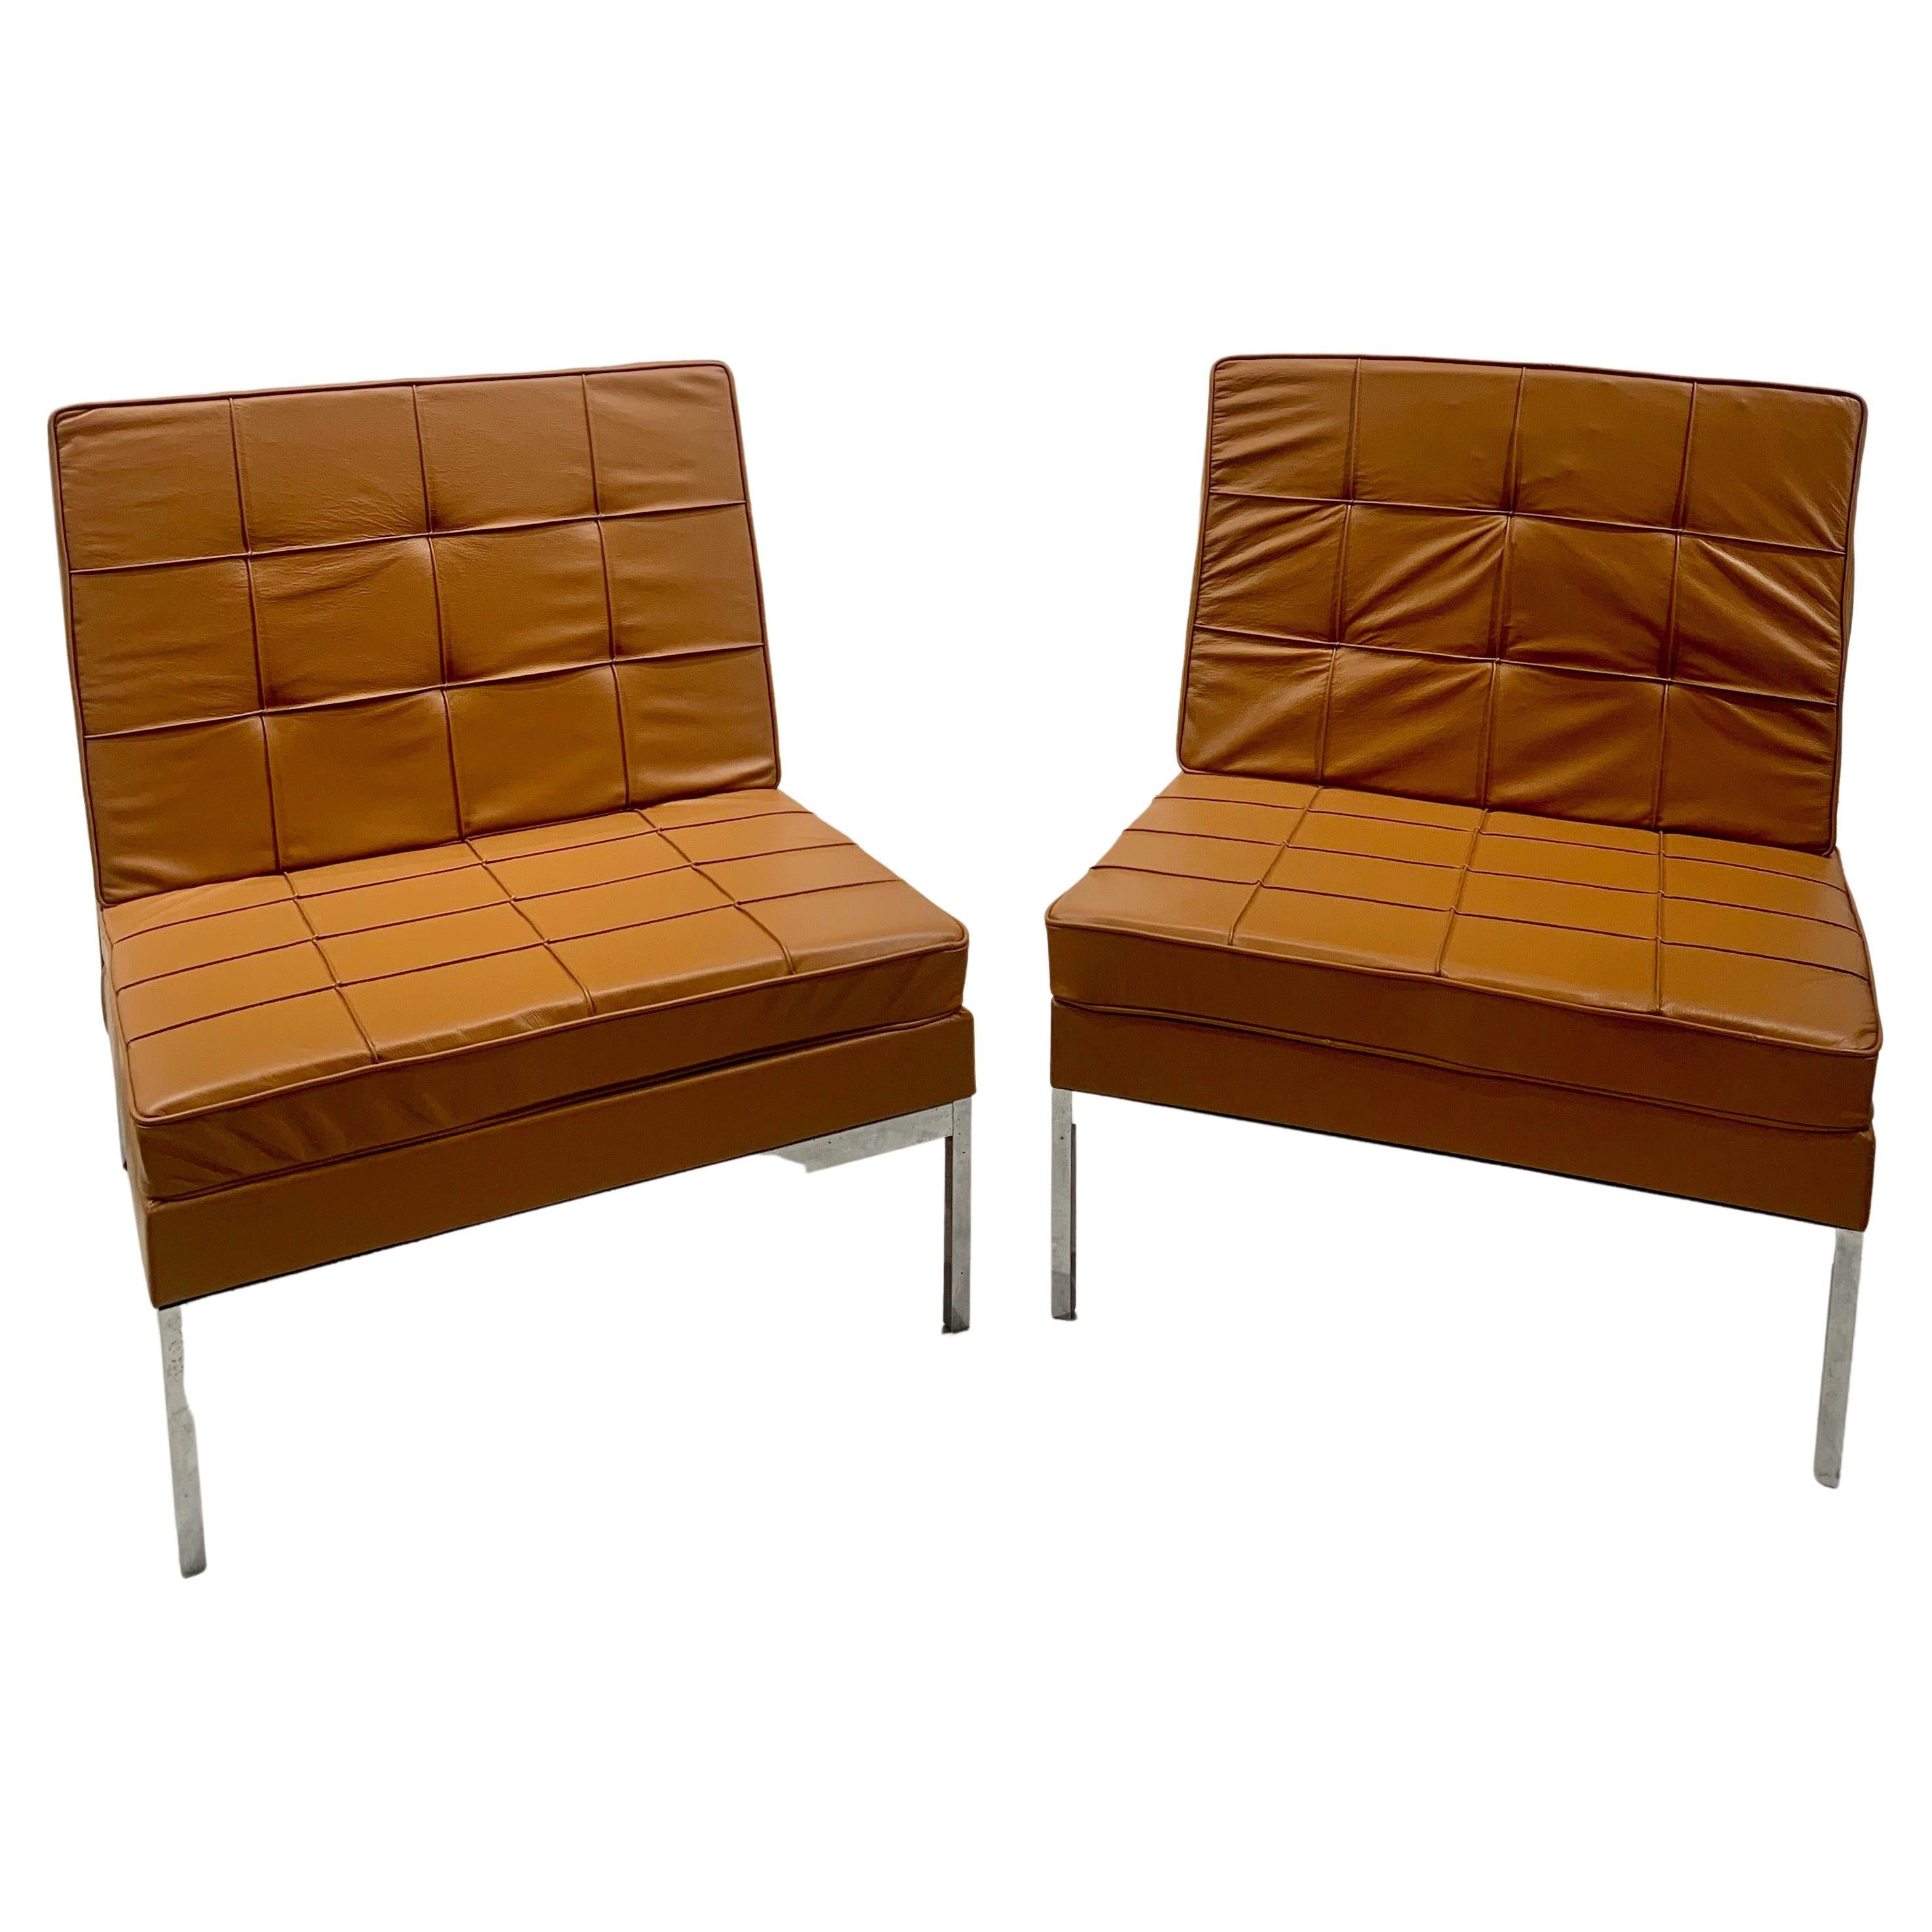 Pair of Camel Leather Armchairs by Florence Knoll for Knoll For Sale